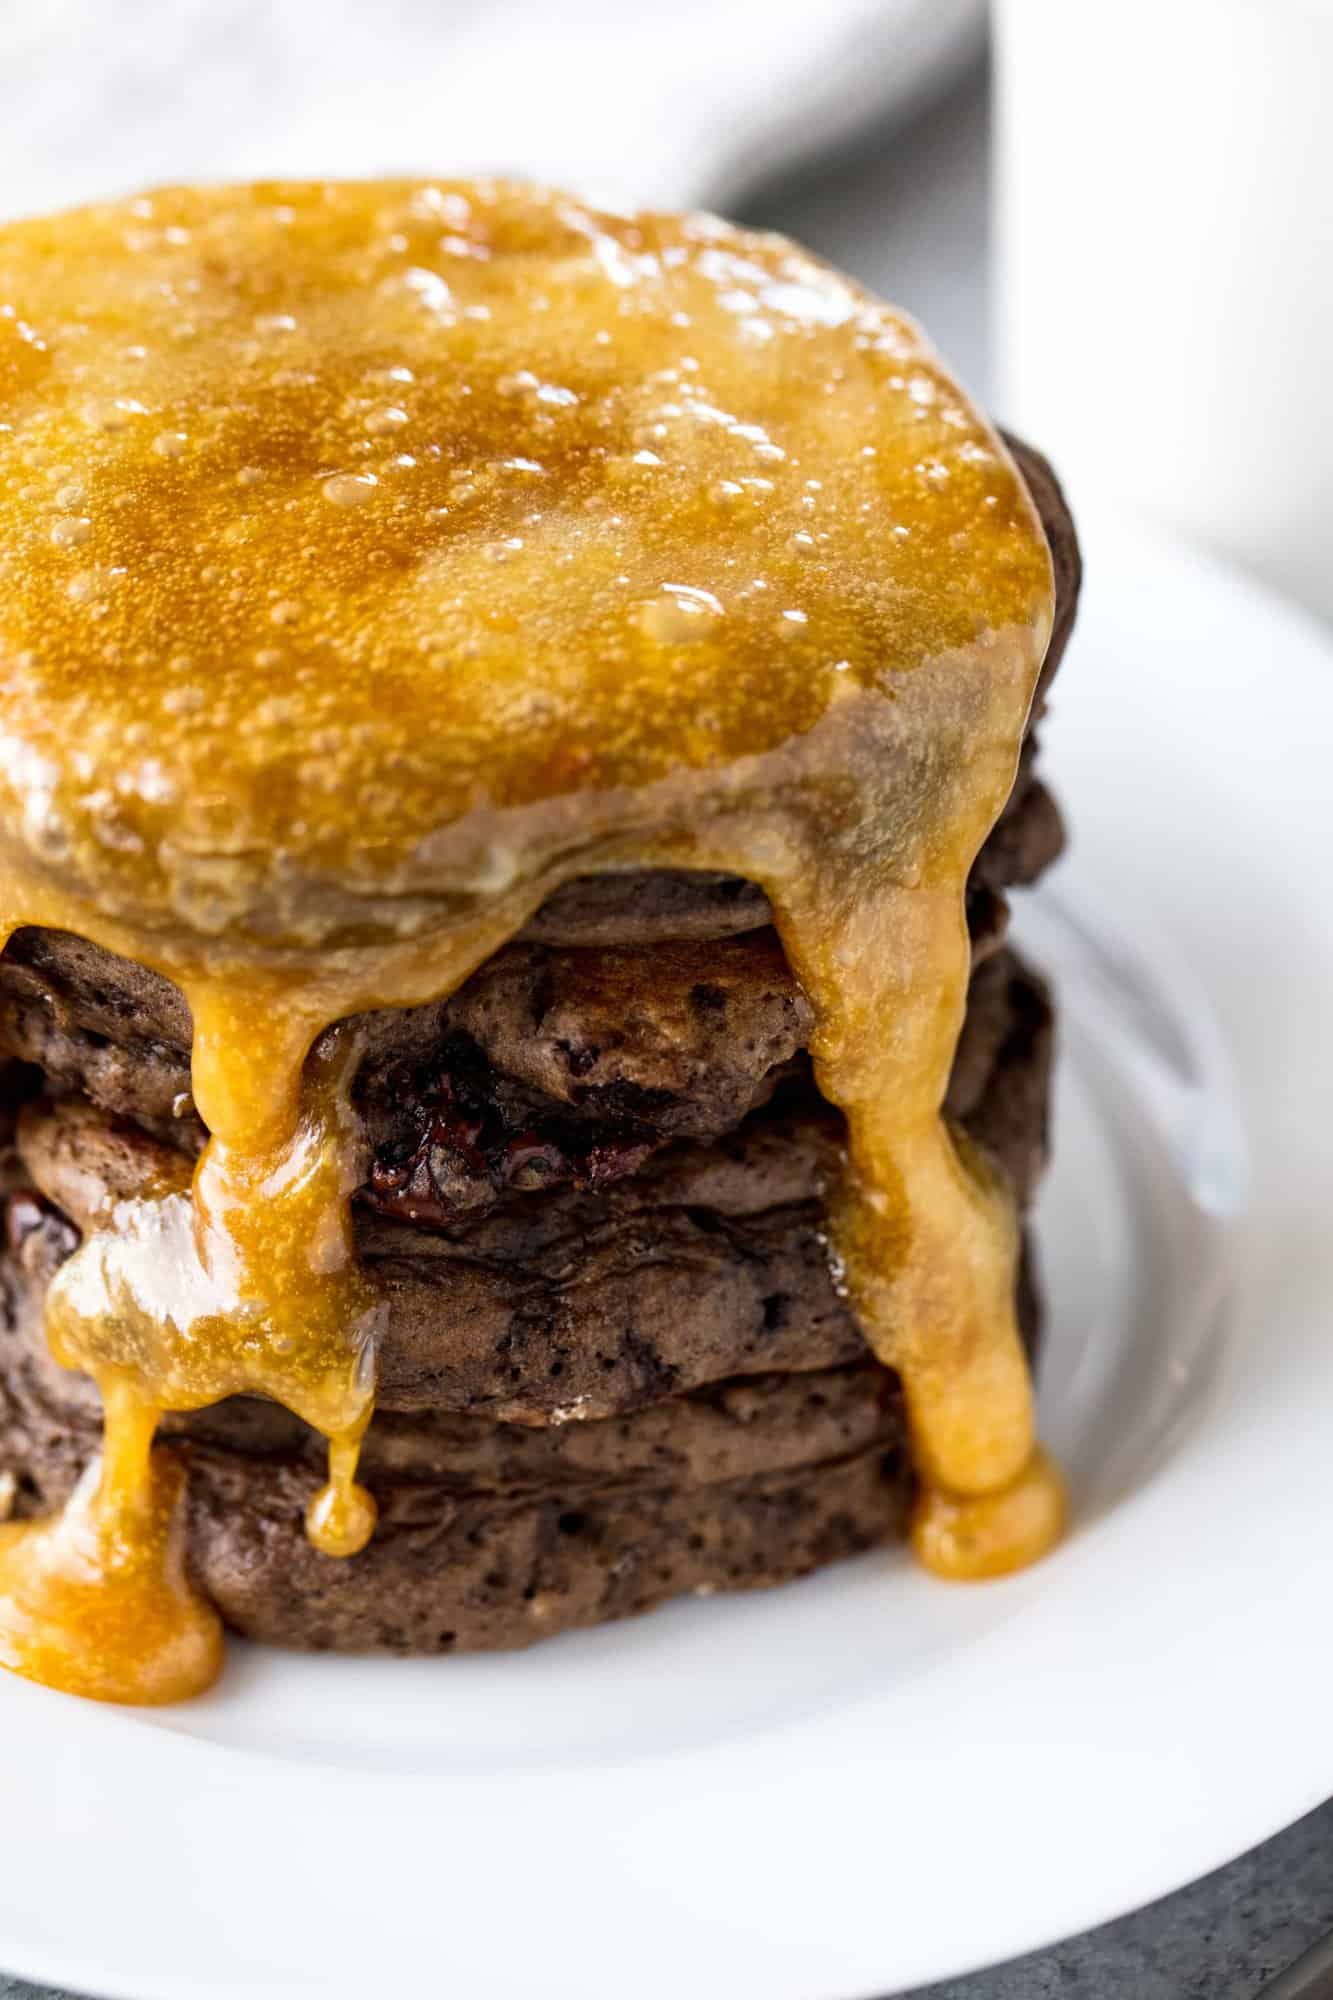 Chocolate Pancakes with Caramel Syrup are decadent deliciousness whether you have them for breakfast or dessert. Easy to make and, oh, so indulgent!